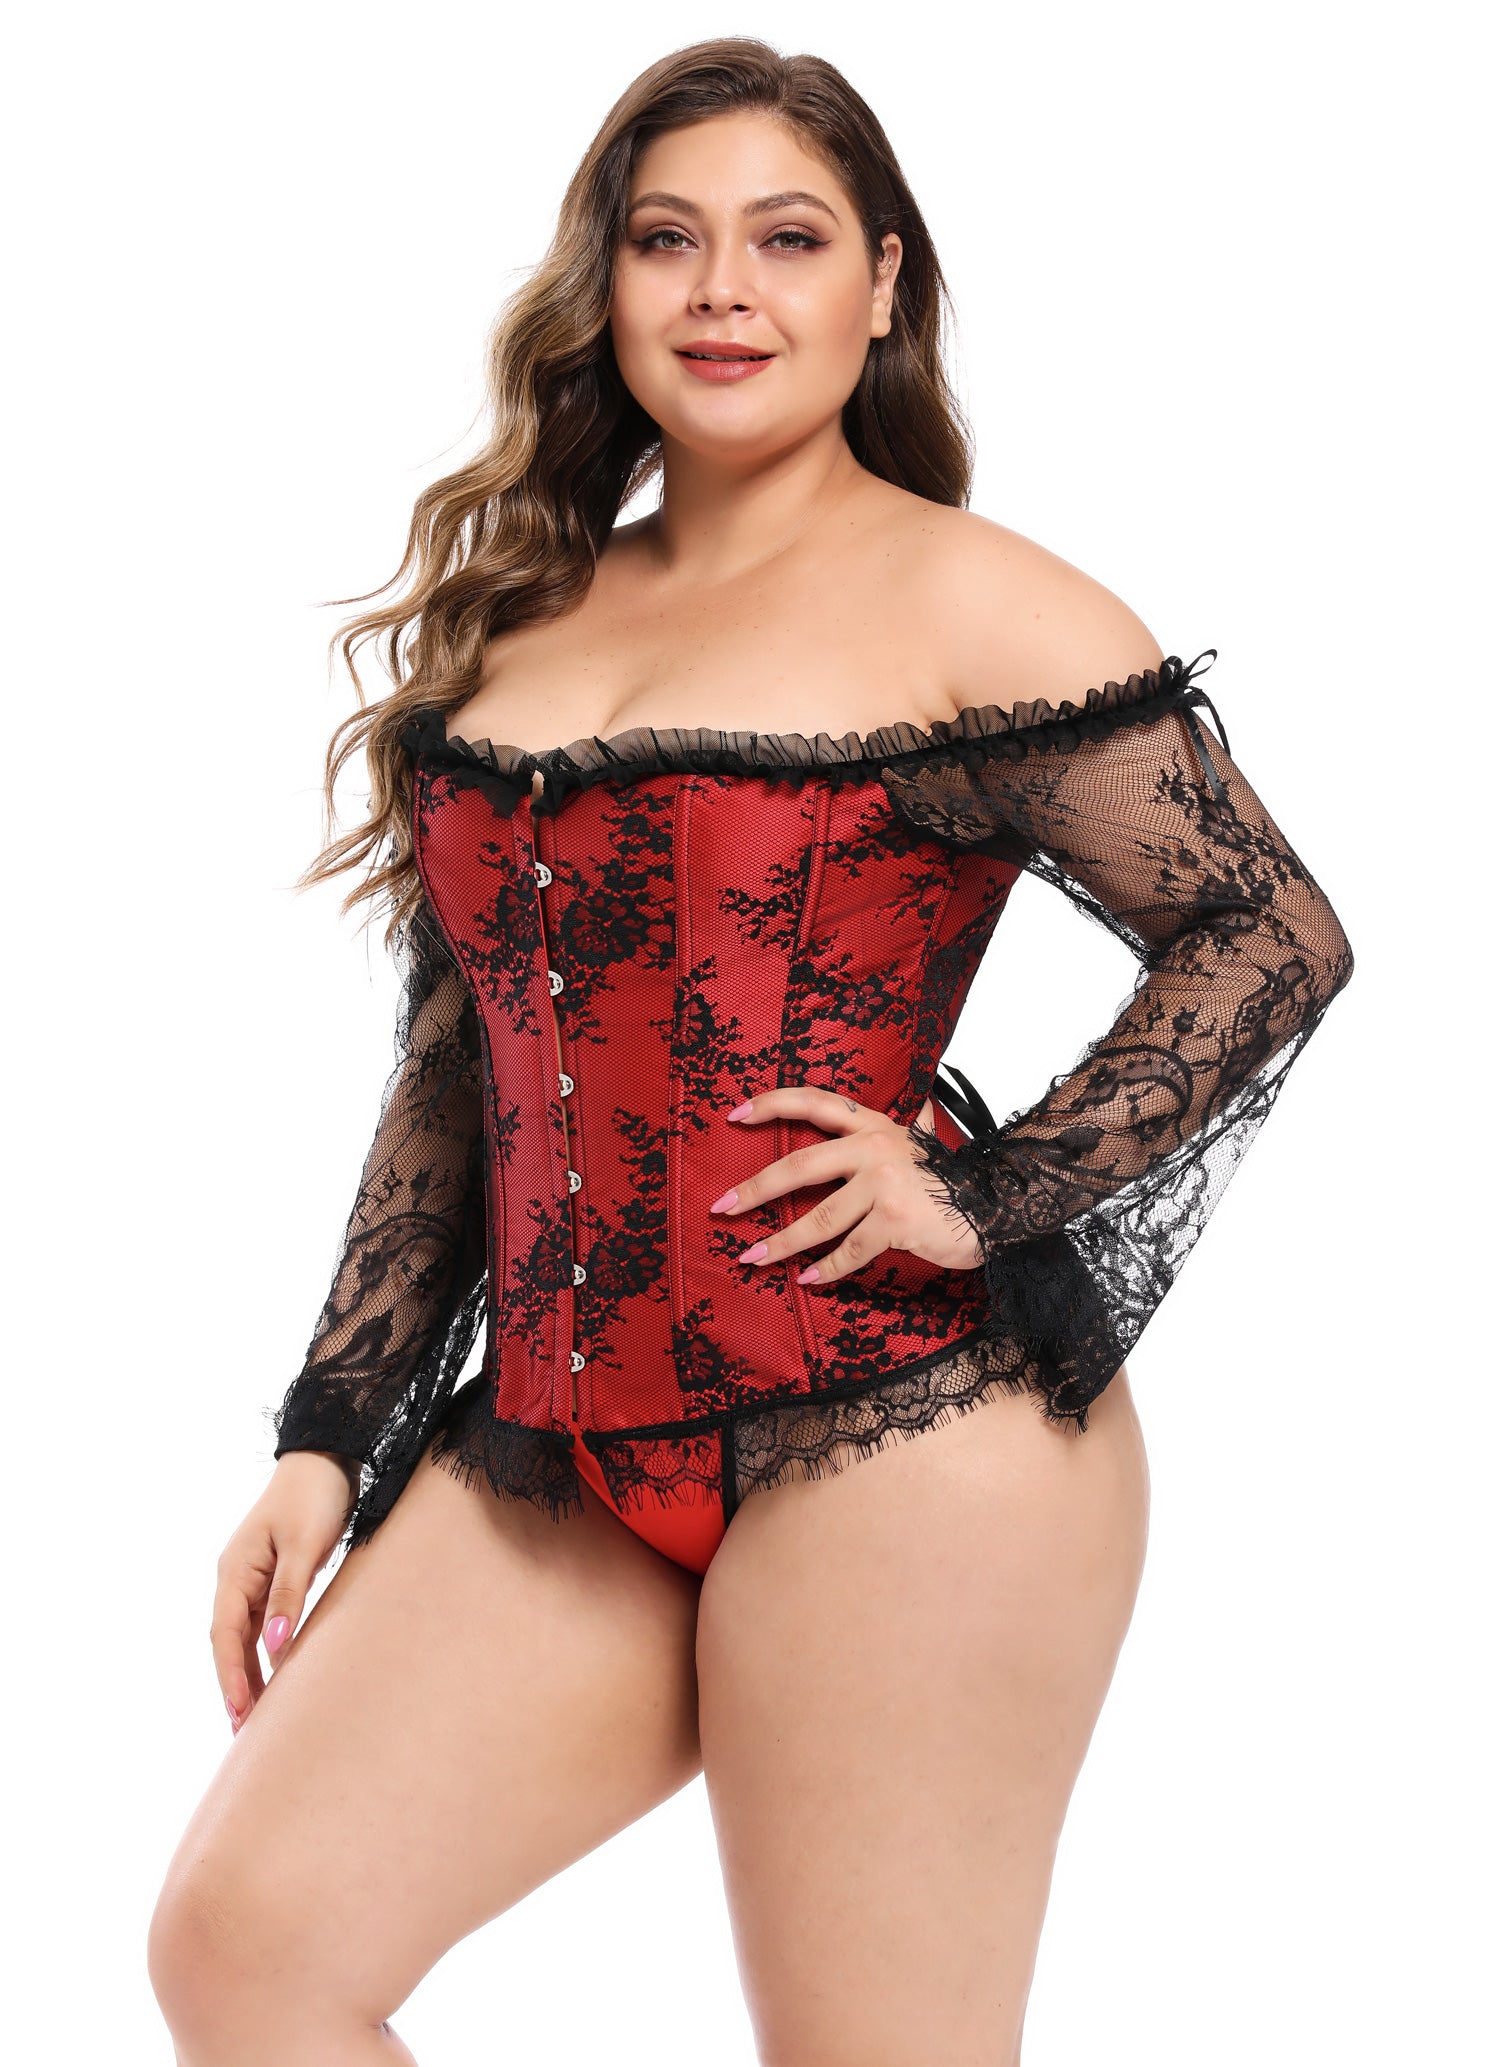 Lace Corset Set With Sleeve